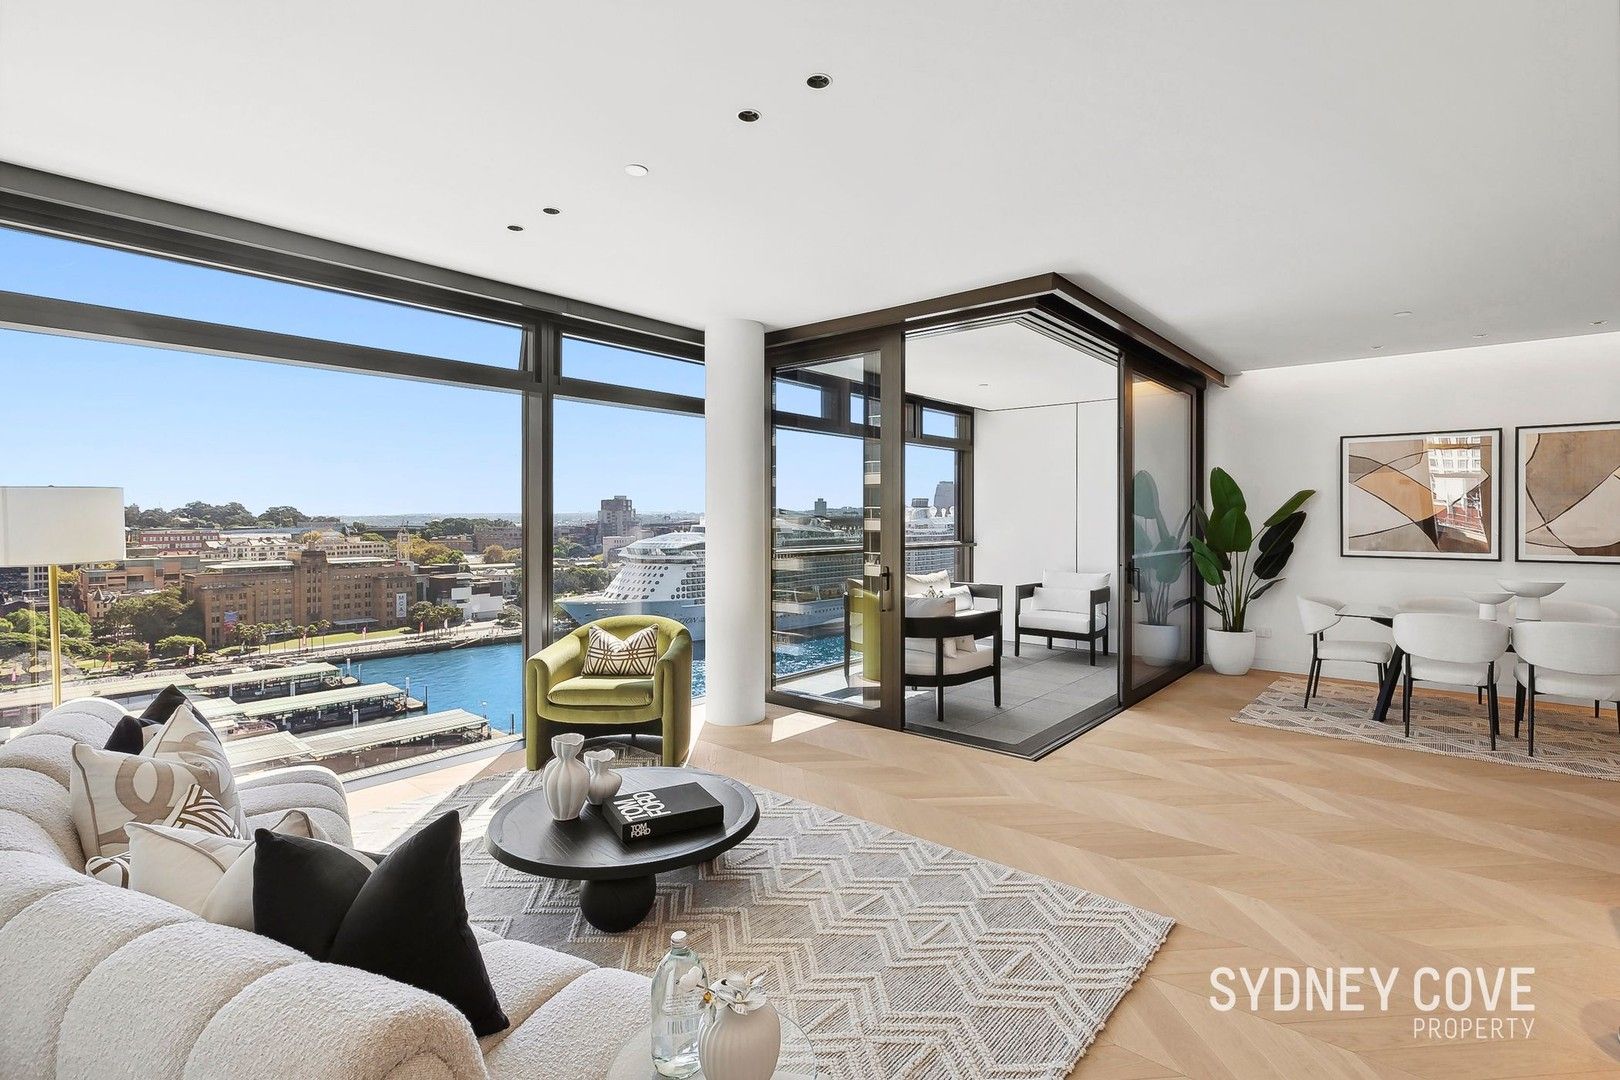 2 bedrooms Apartment / Unit / Flat in 1503/71 Macquarie St SYDNEY NSW, 2000